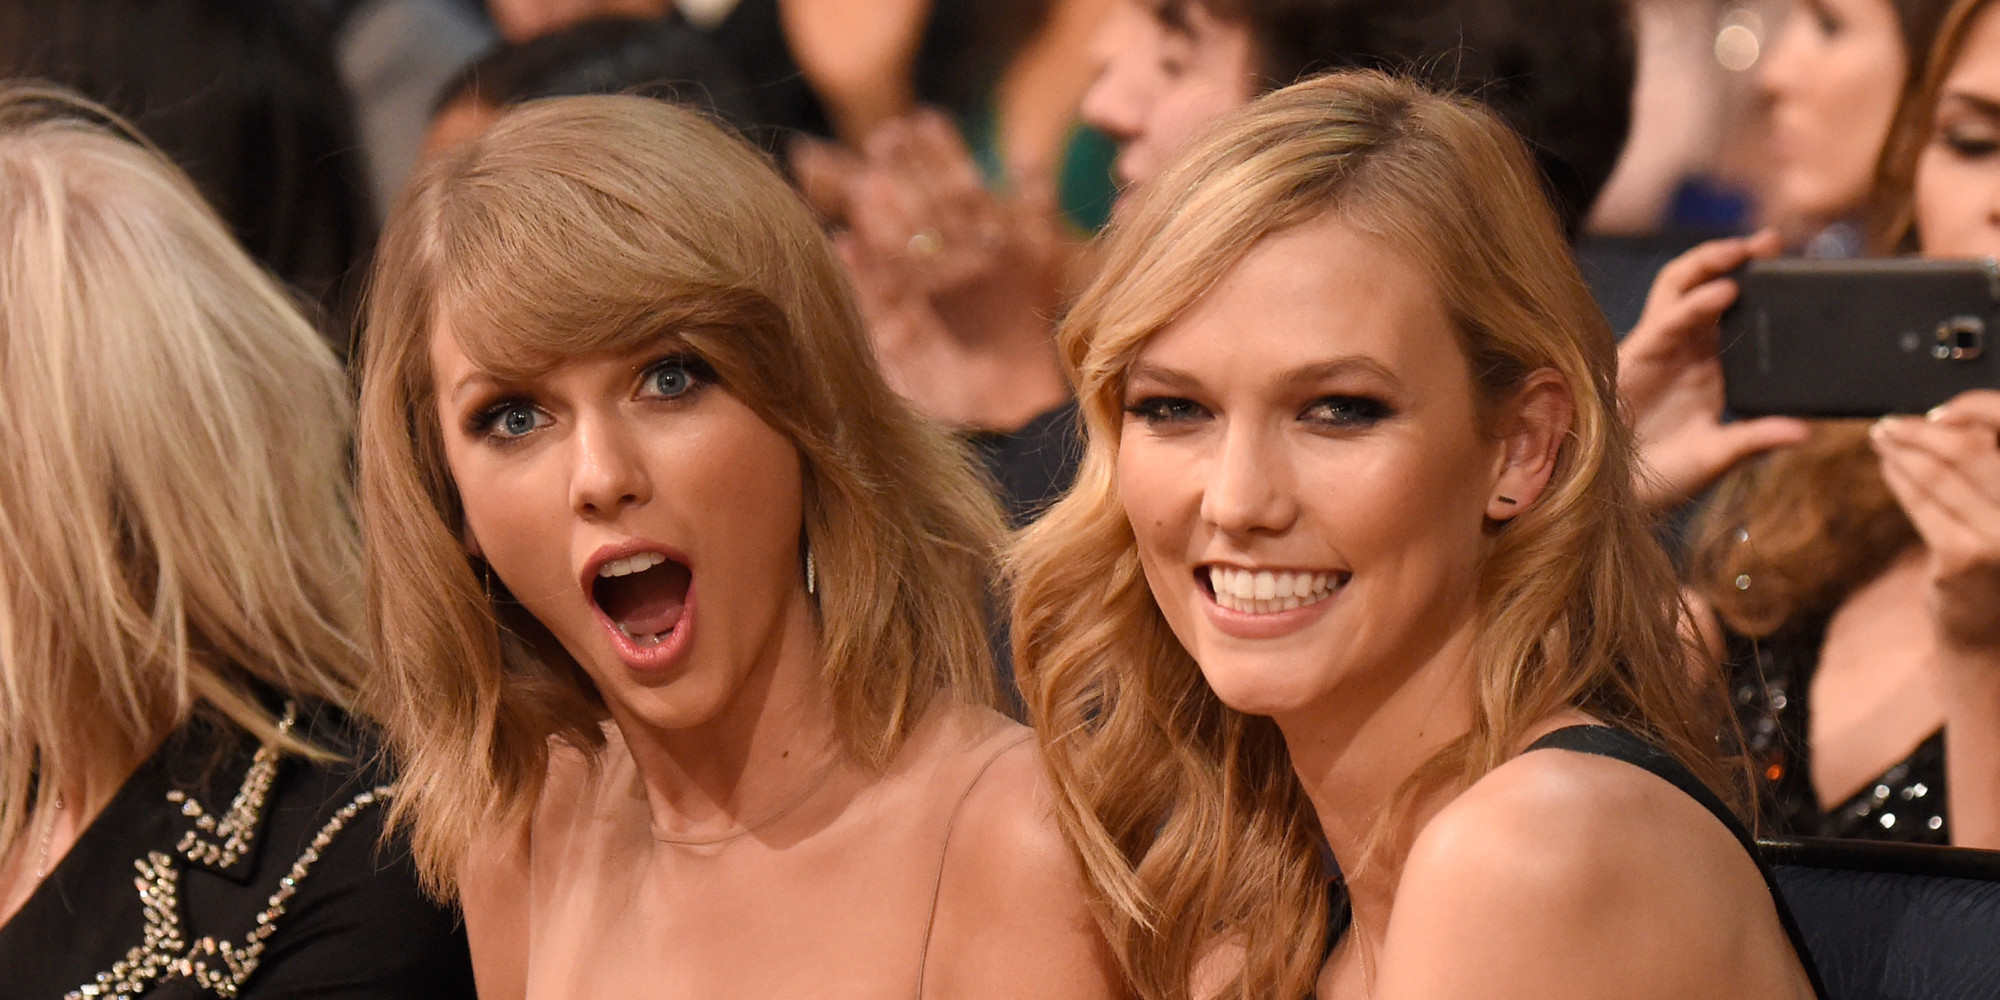 Taylor Swift And Karlie Kloss Were Not Kissing At Concert Rep Says